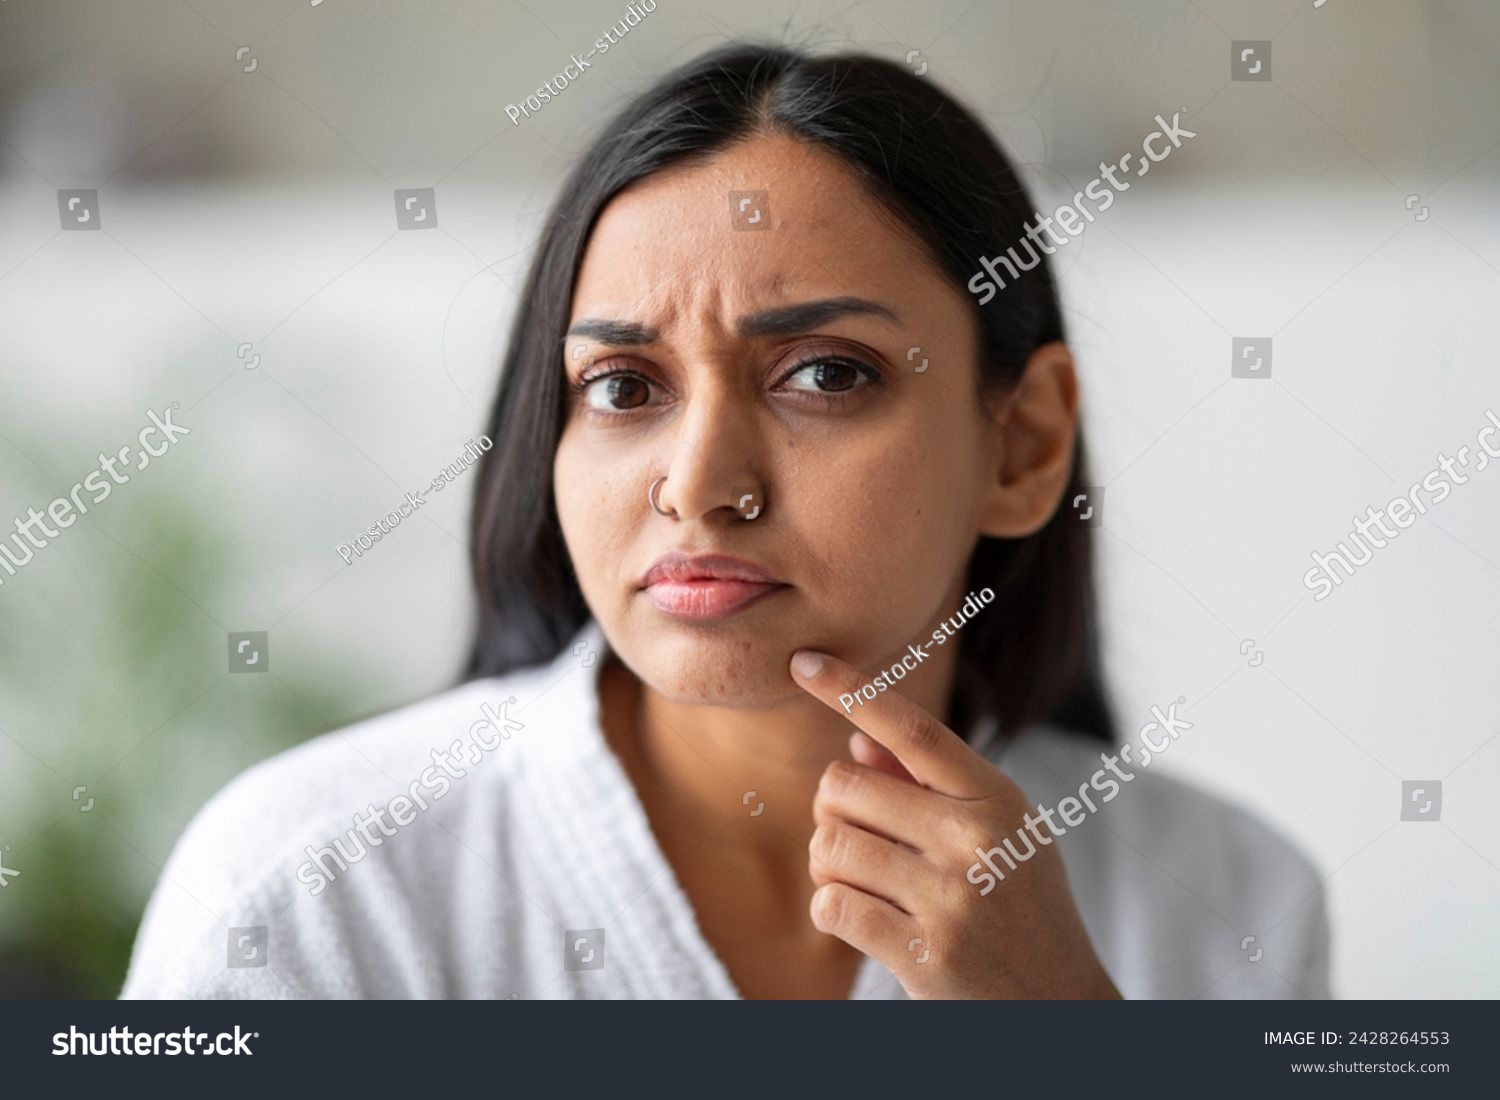 Closeup of upset young indian woman in white bathrobe looking at camera and touching her face at bathroom, suffering from skin problems. Acne, wrinkles, dull skin concept #2428264553